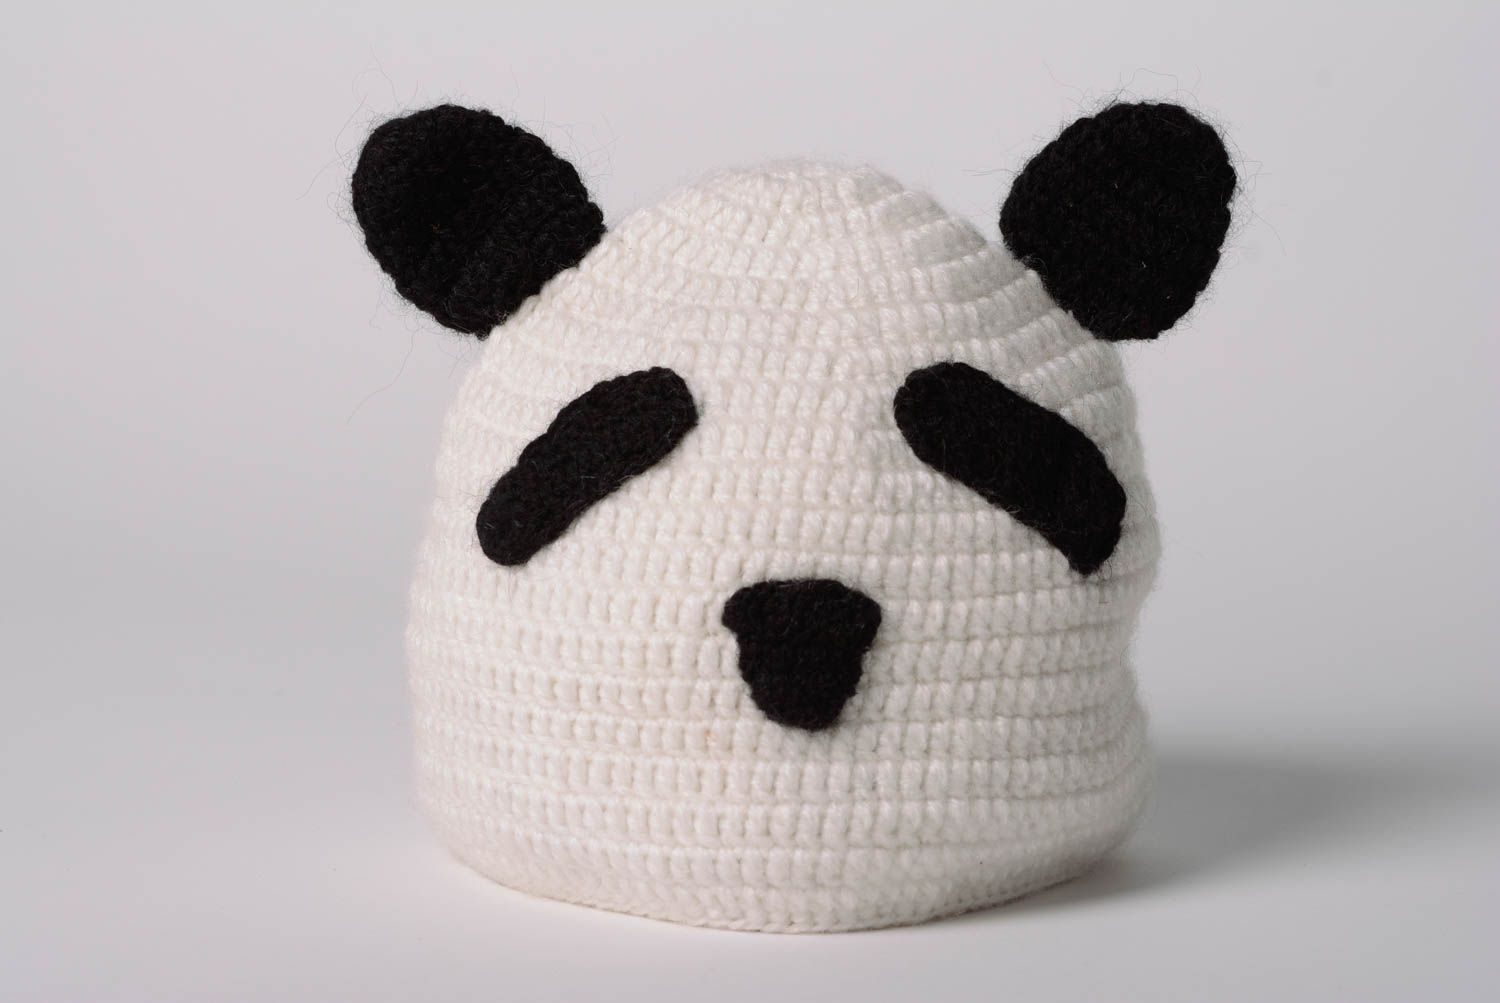 Handmade funny animal hat knitted of woolen threads Panda for women and kids photo 1